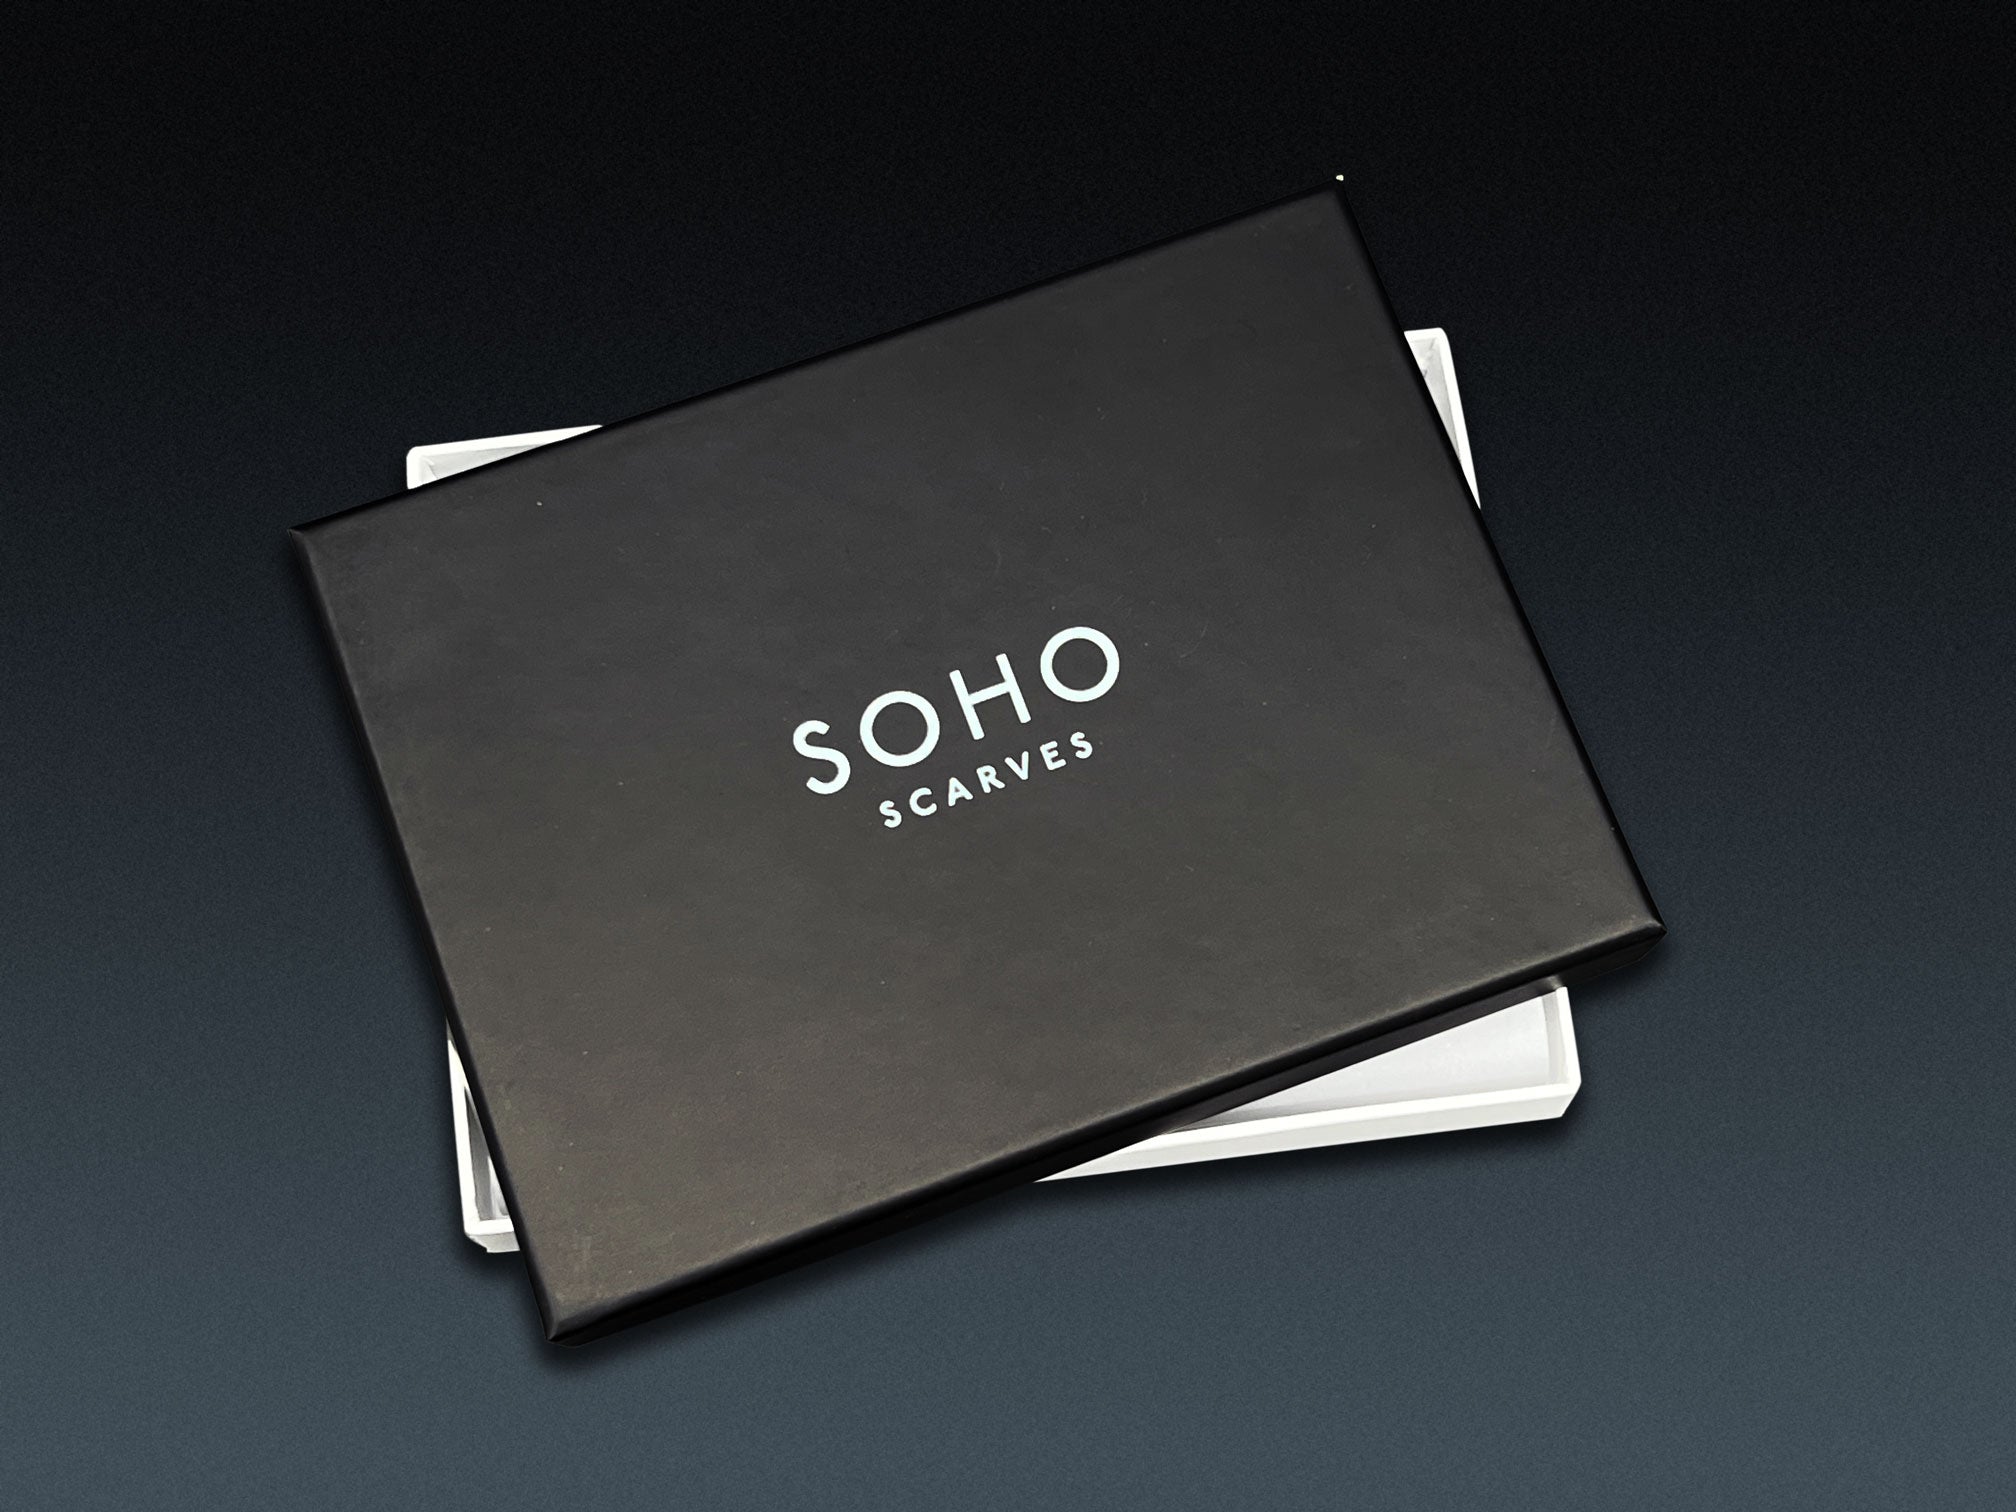 Small deluxe SOHO Scarves gift box for 'The Fan' pocket square.